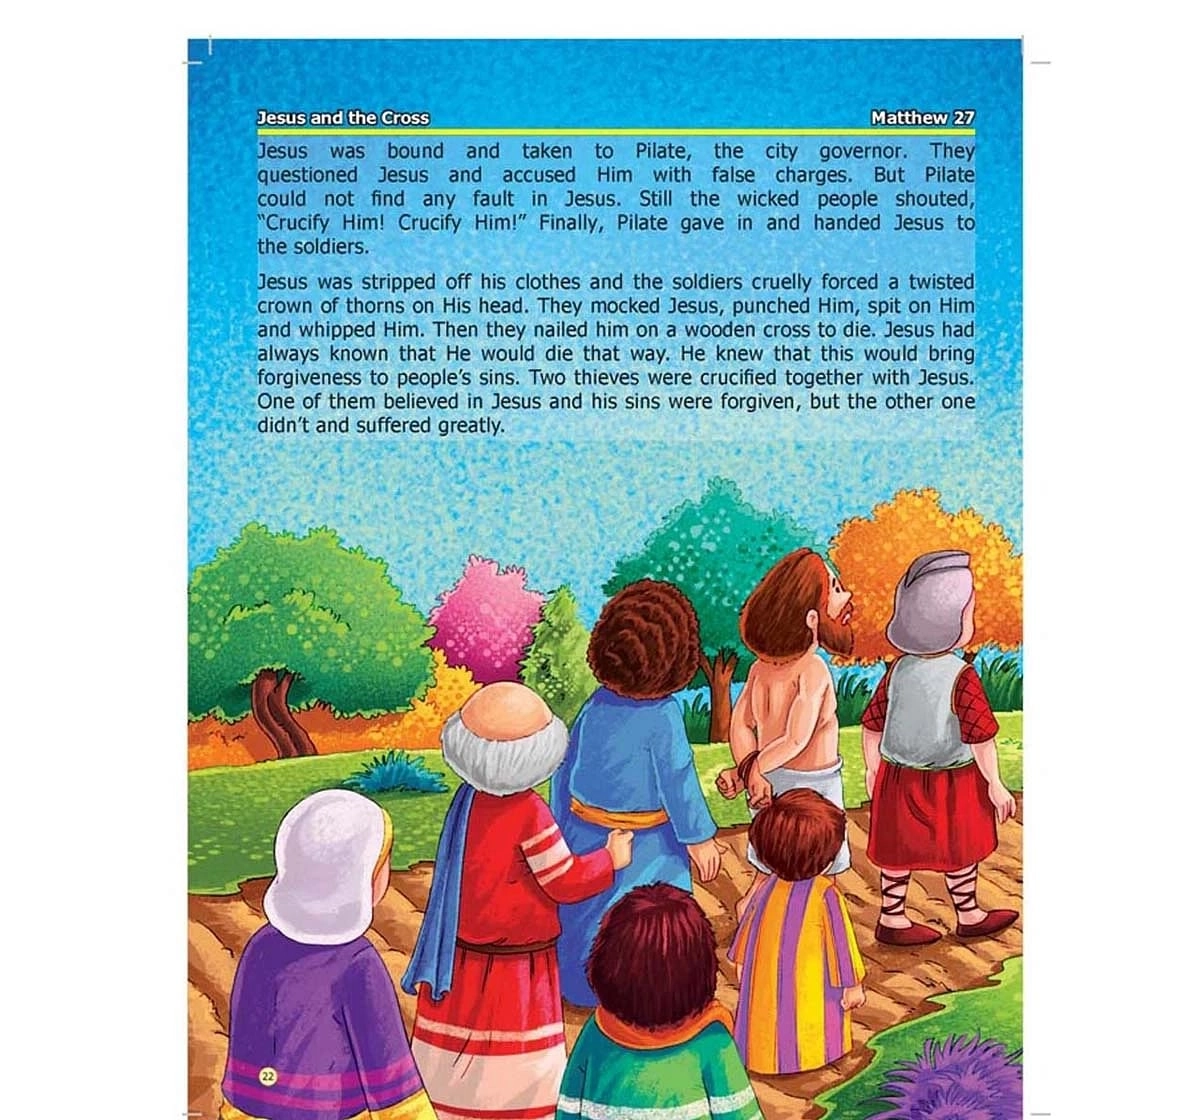 Dreamland Paper Back Bible Pack of 2 Religion Book for kids 5Y+, Multicolour